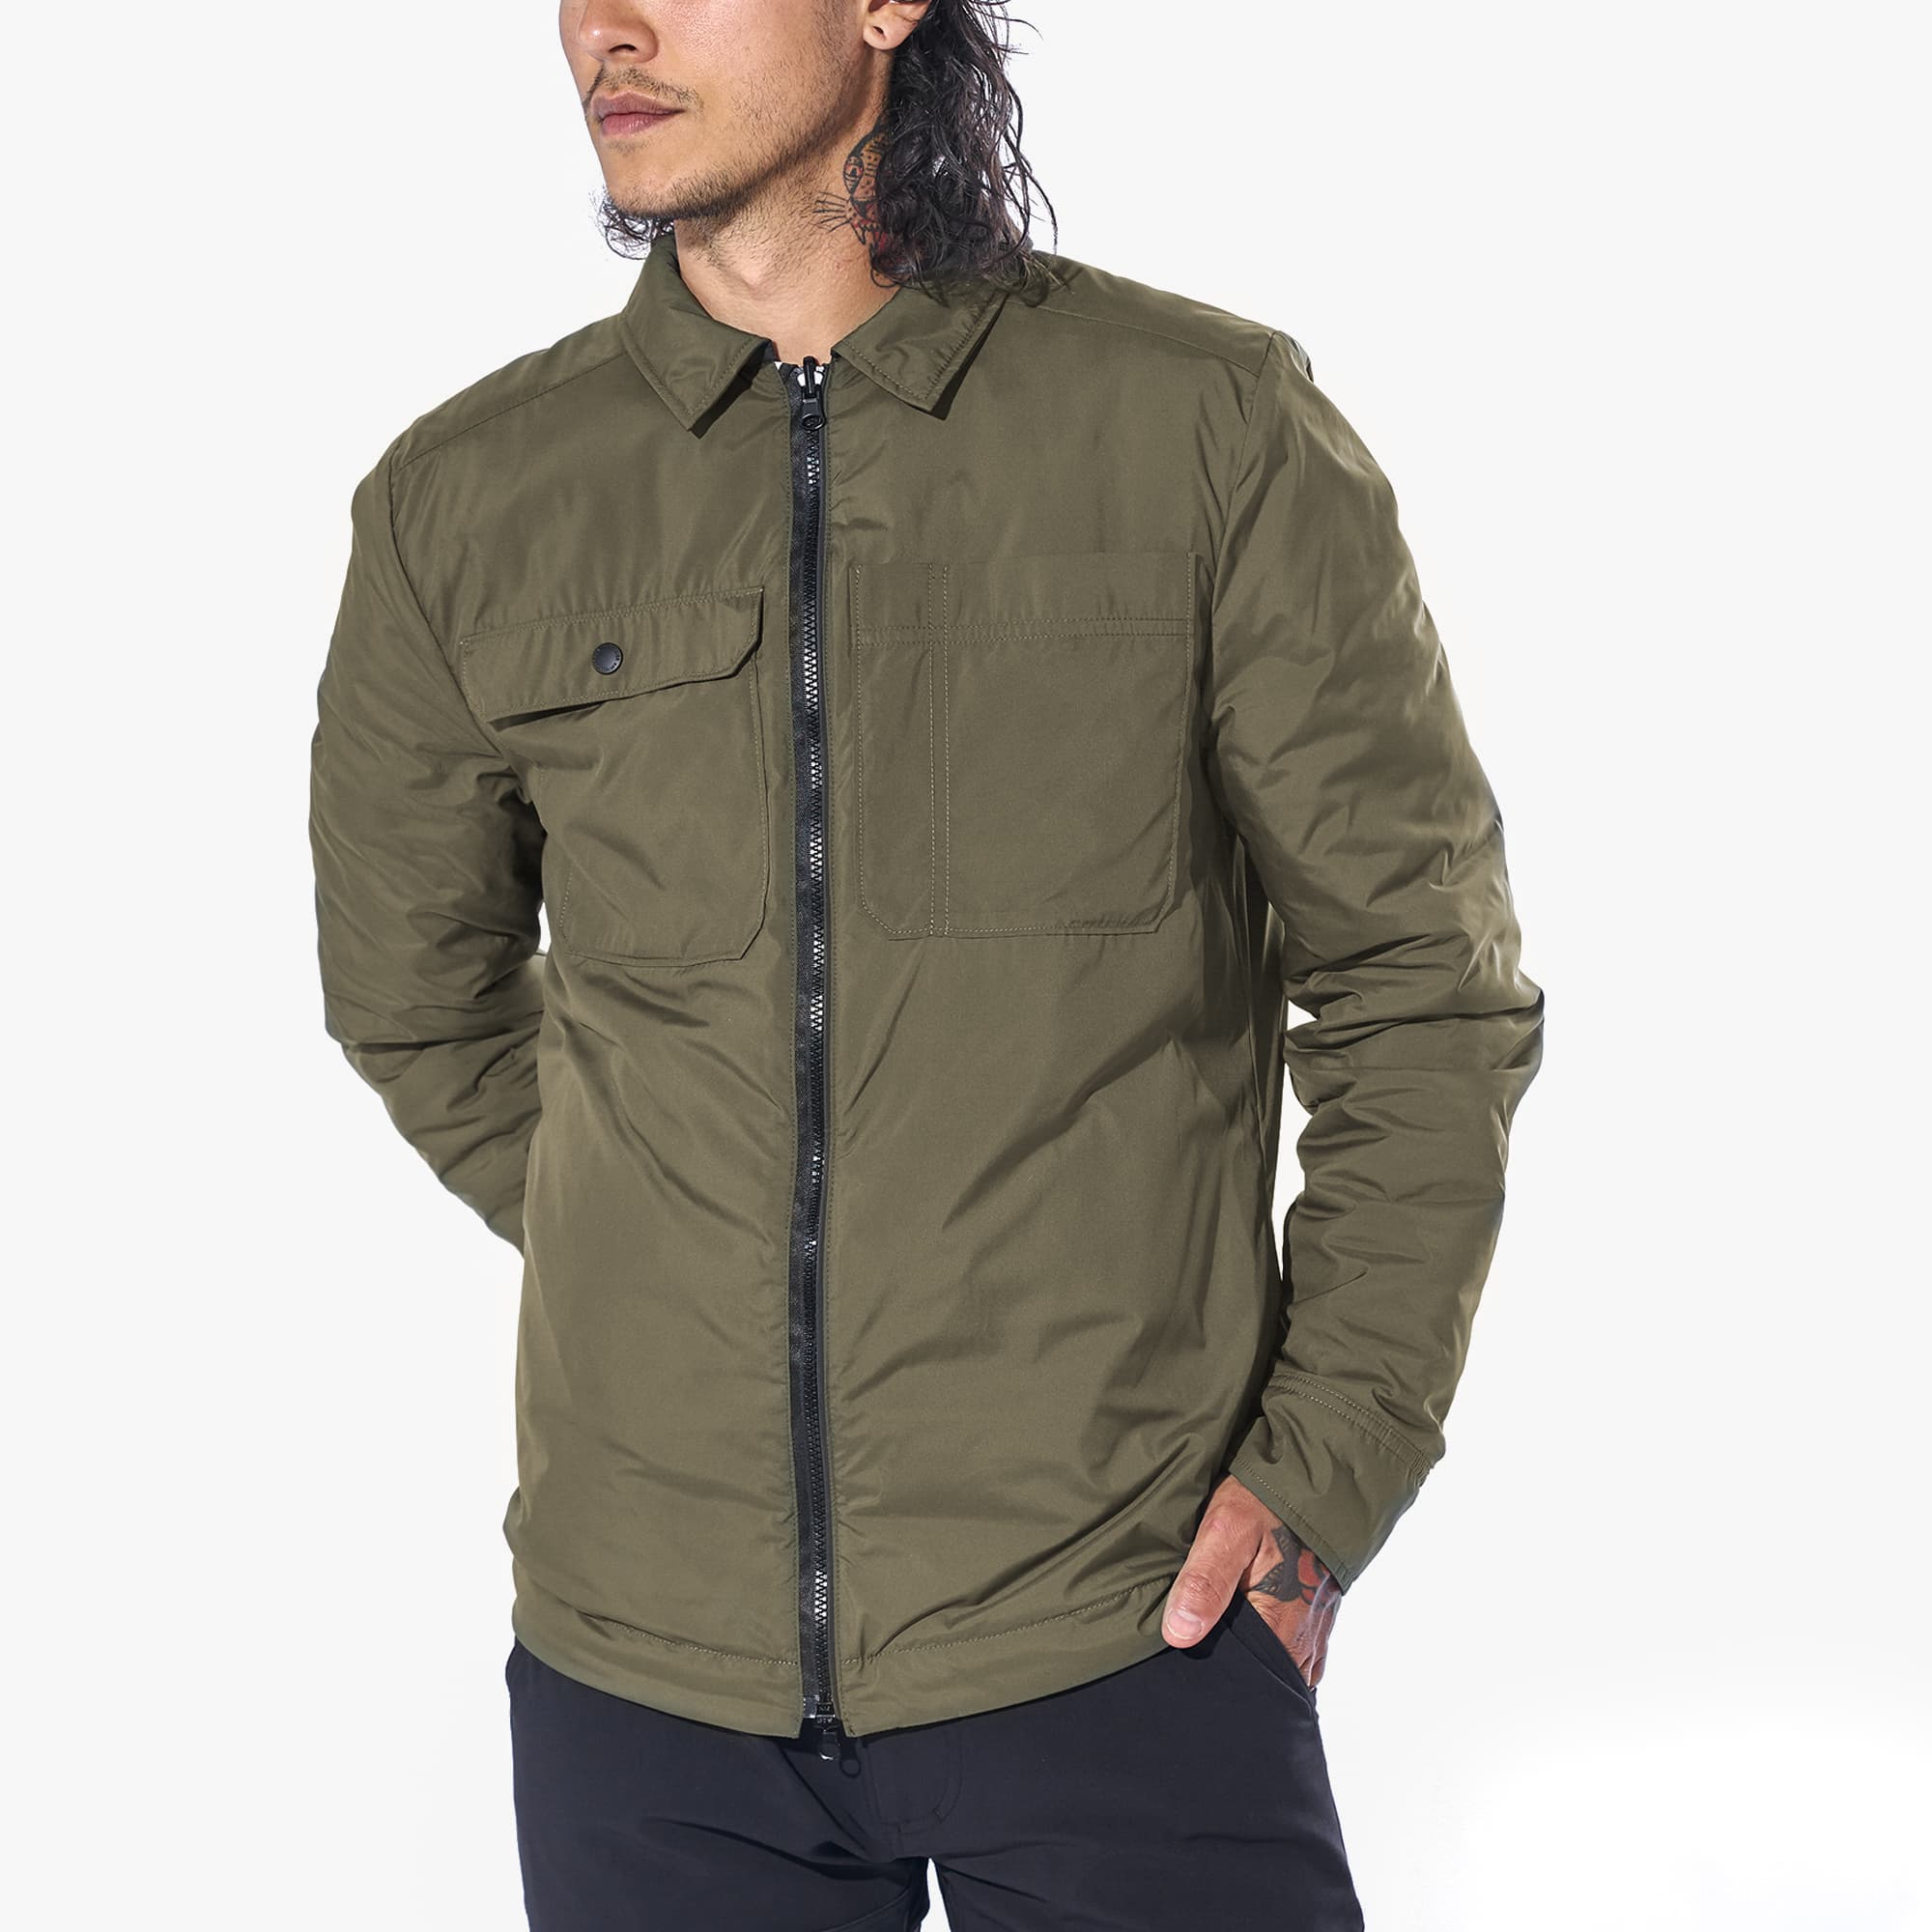 Two way zip Shirt Jacket in black with green on a man green side out